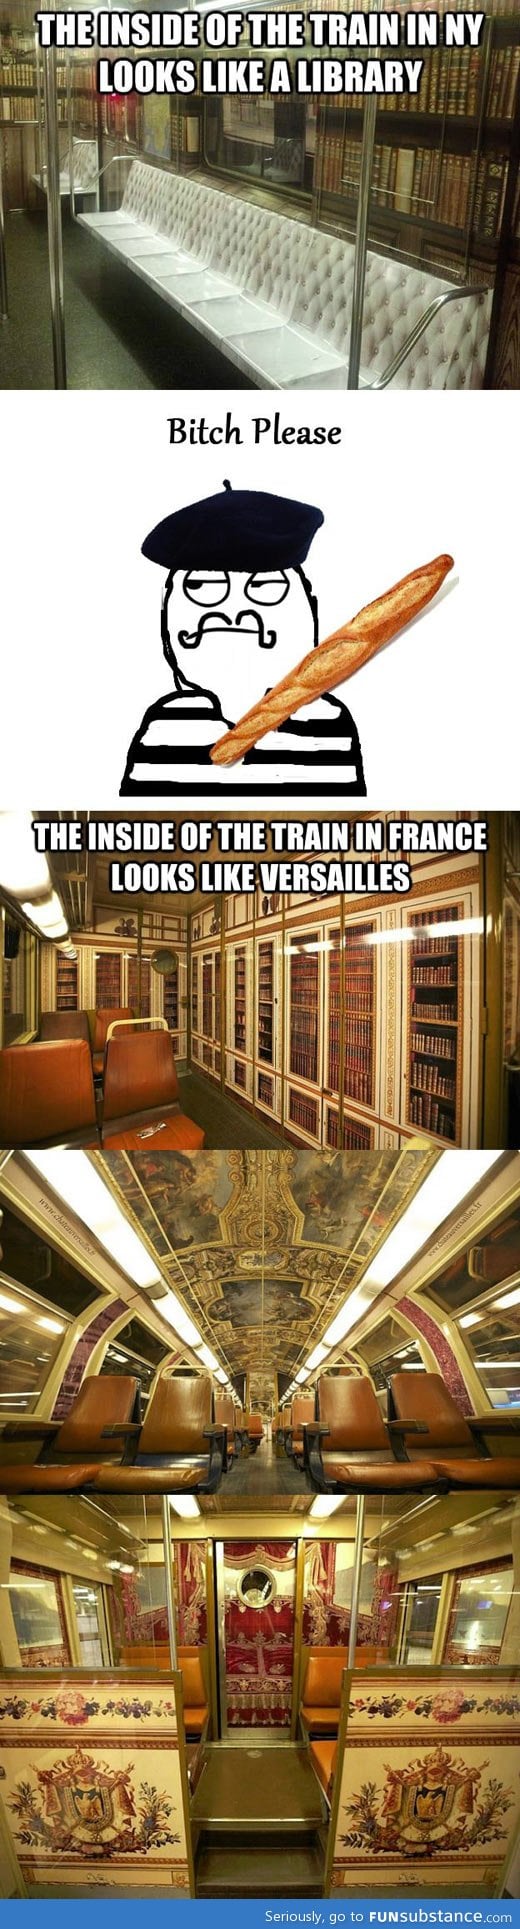 The inside of a train